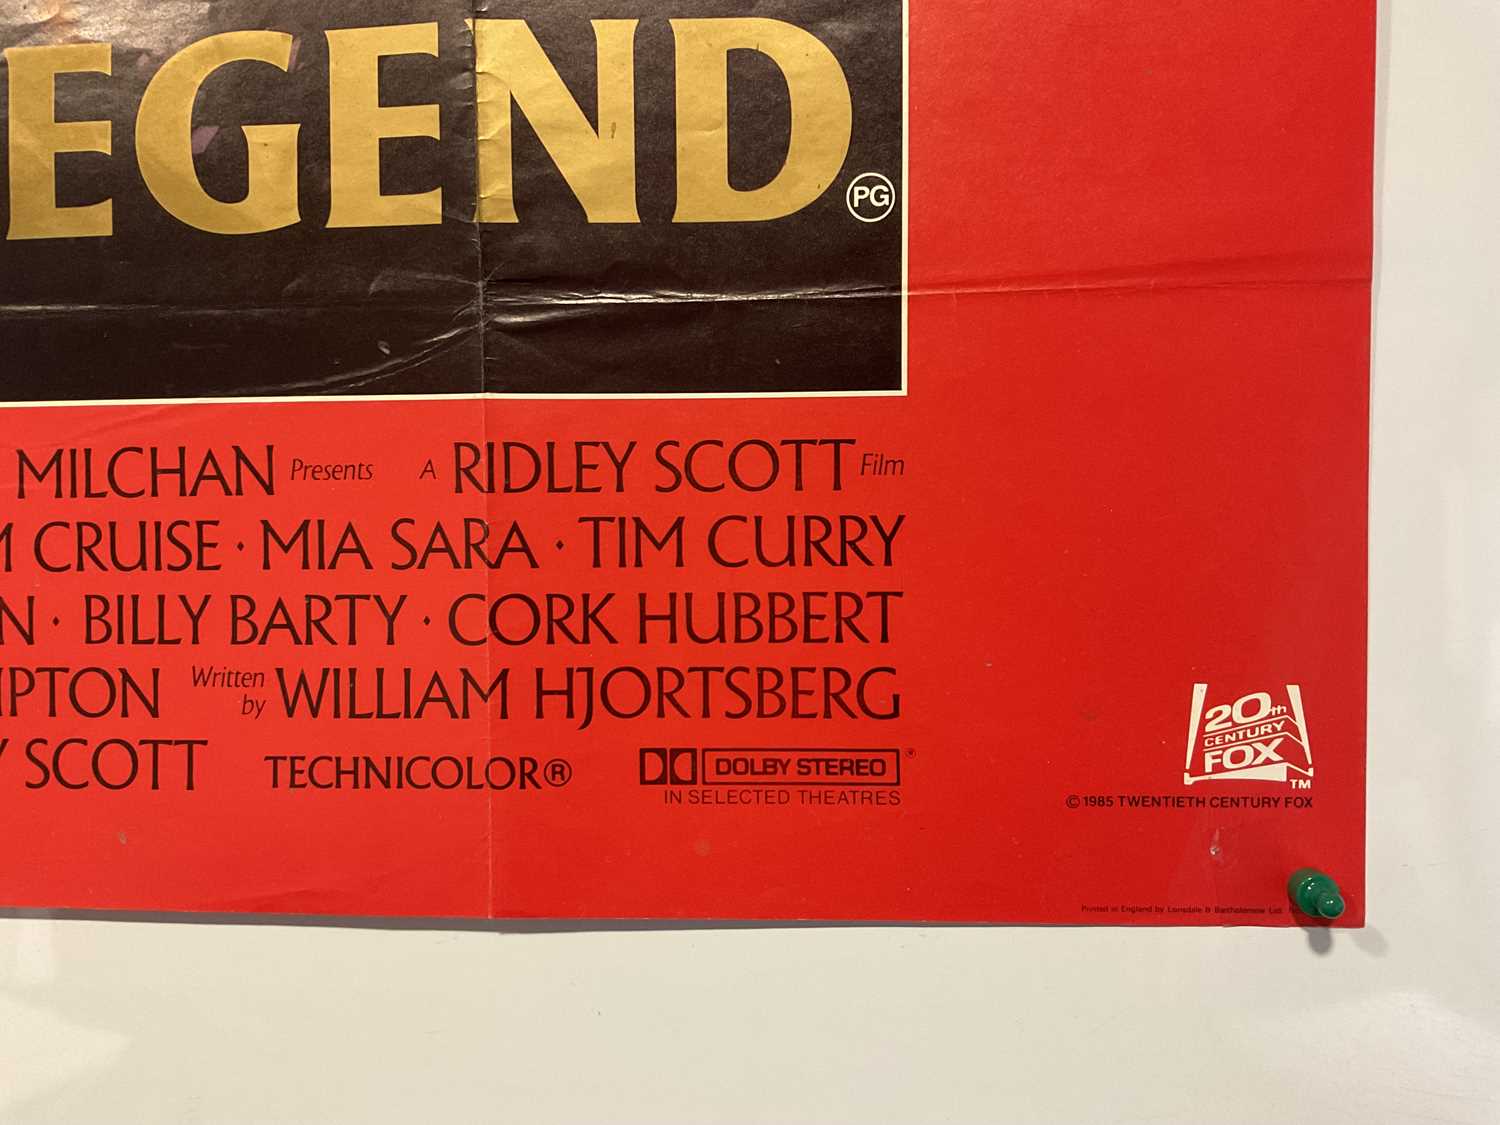 LEGEND (1985) UK Quad film poster, Ridley Scott directed fantasy adventure starring a young Tom - Image 3 of 5